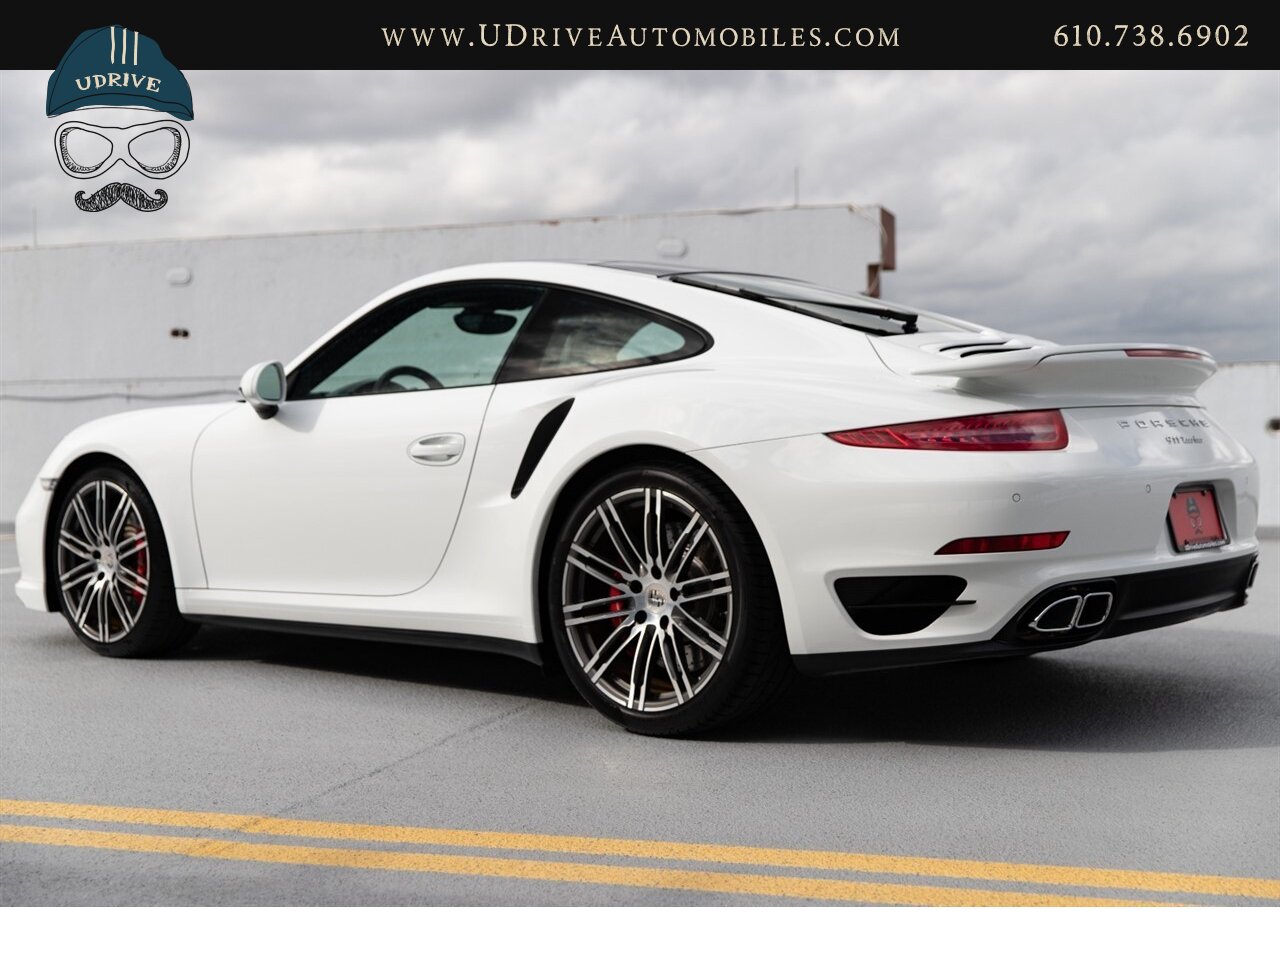 2014 Porsche 911 Turbo 12k Miles White over Black Chrono Rear Wiper  Sport Seats 20in Turbo Whls Sunroof Red Belts - Photo 5 - West Chester, PA 19382